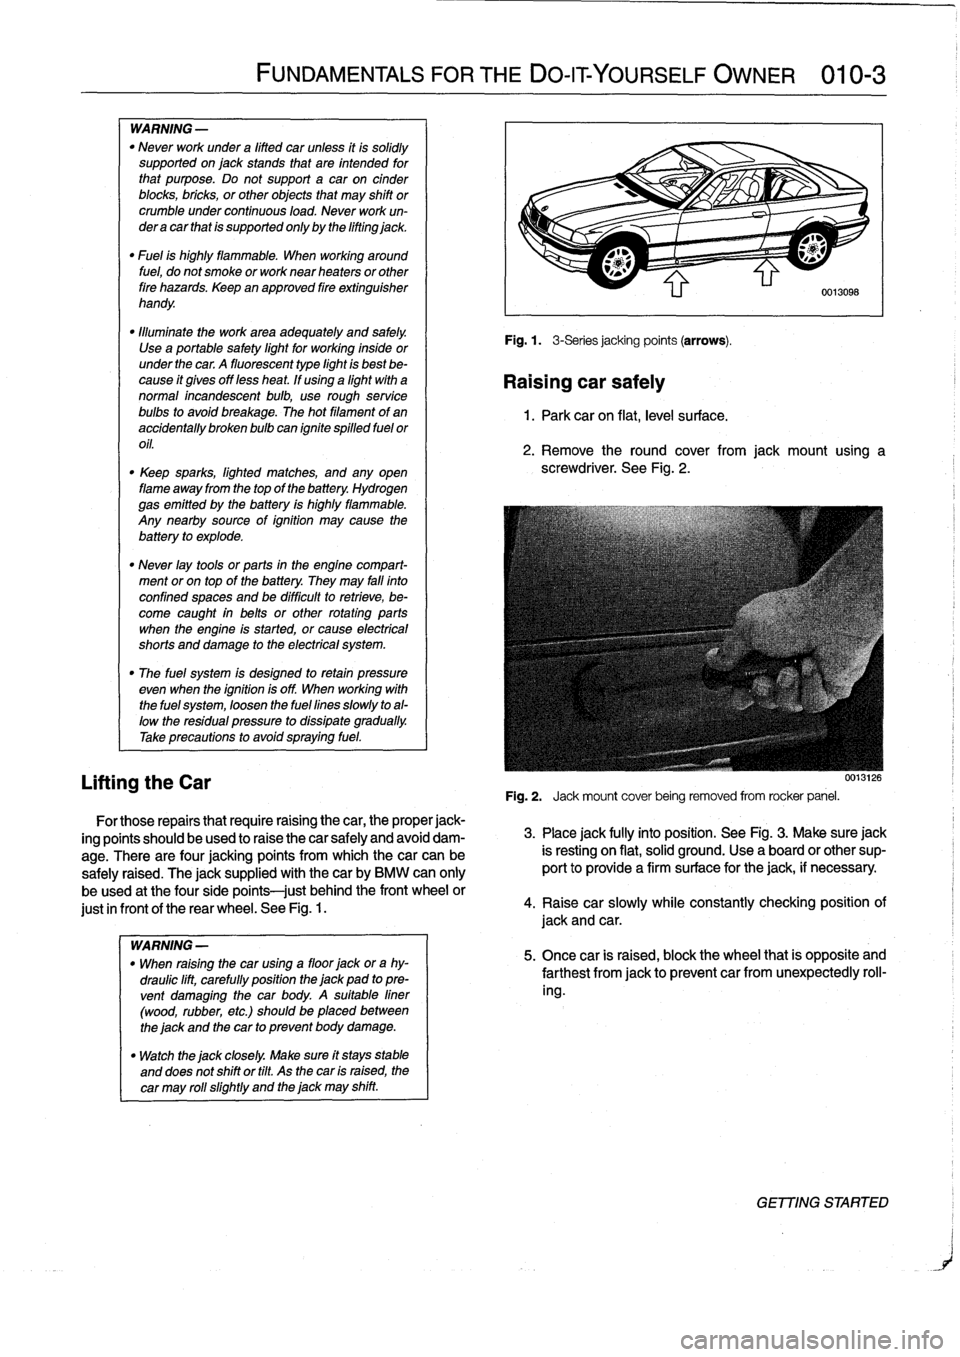 BMW M3 1993 E36 Workshop Manual 
WARNING
-

"
Never
work
under
a
lifted
car
unless
it
is
solidly
supported
on
jack
stands
that
are
intended
for
that
purpose
.
Do
not
support
a
car
on
cinder
blocks,
bricks,
or
other
objects
that
may
